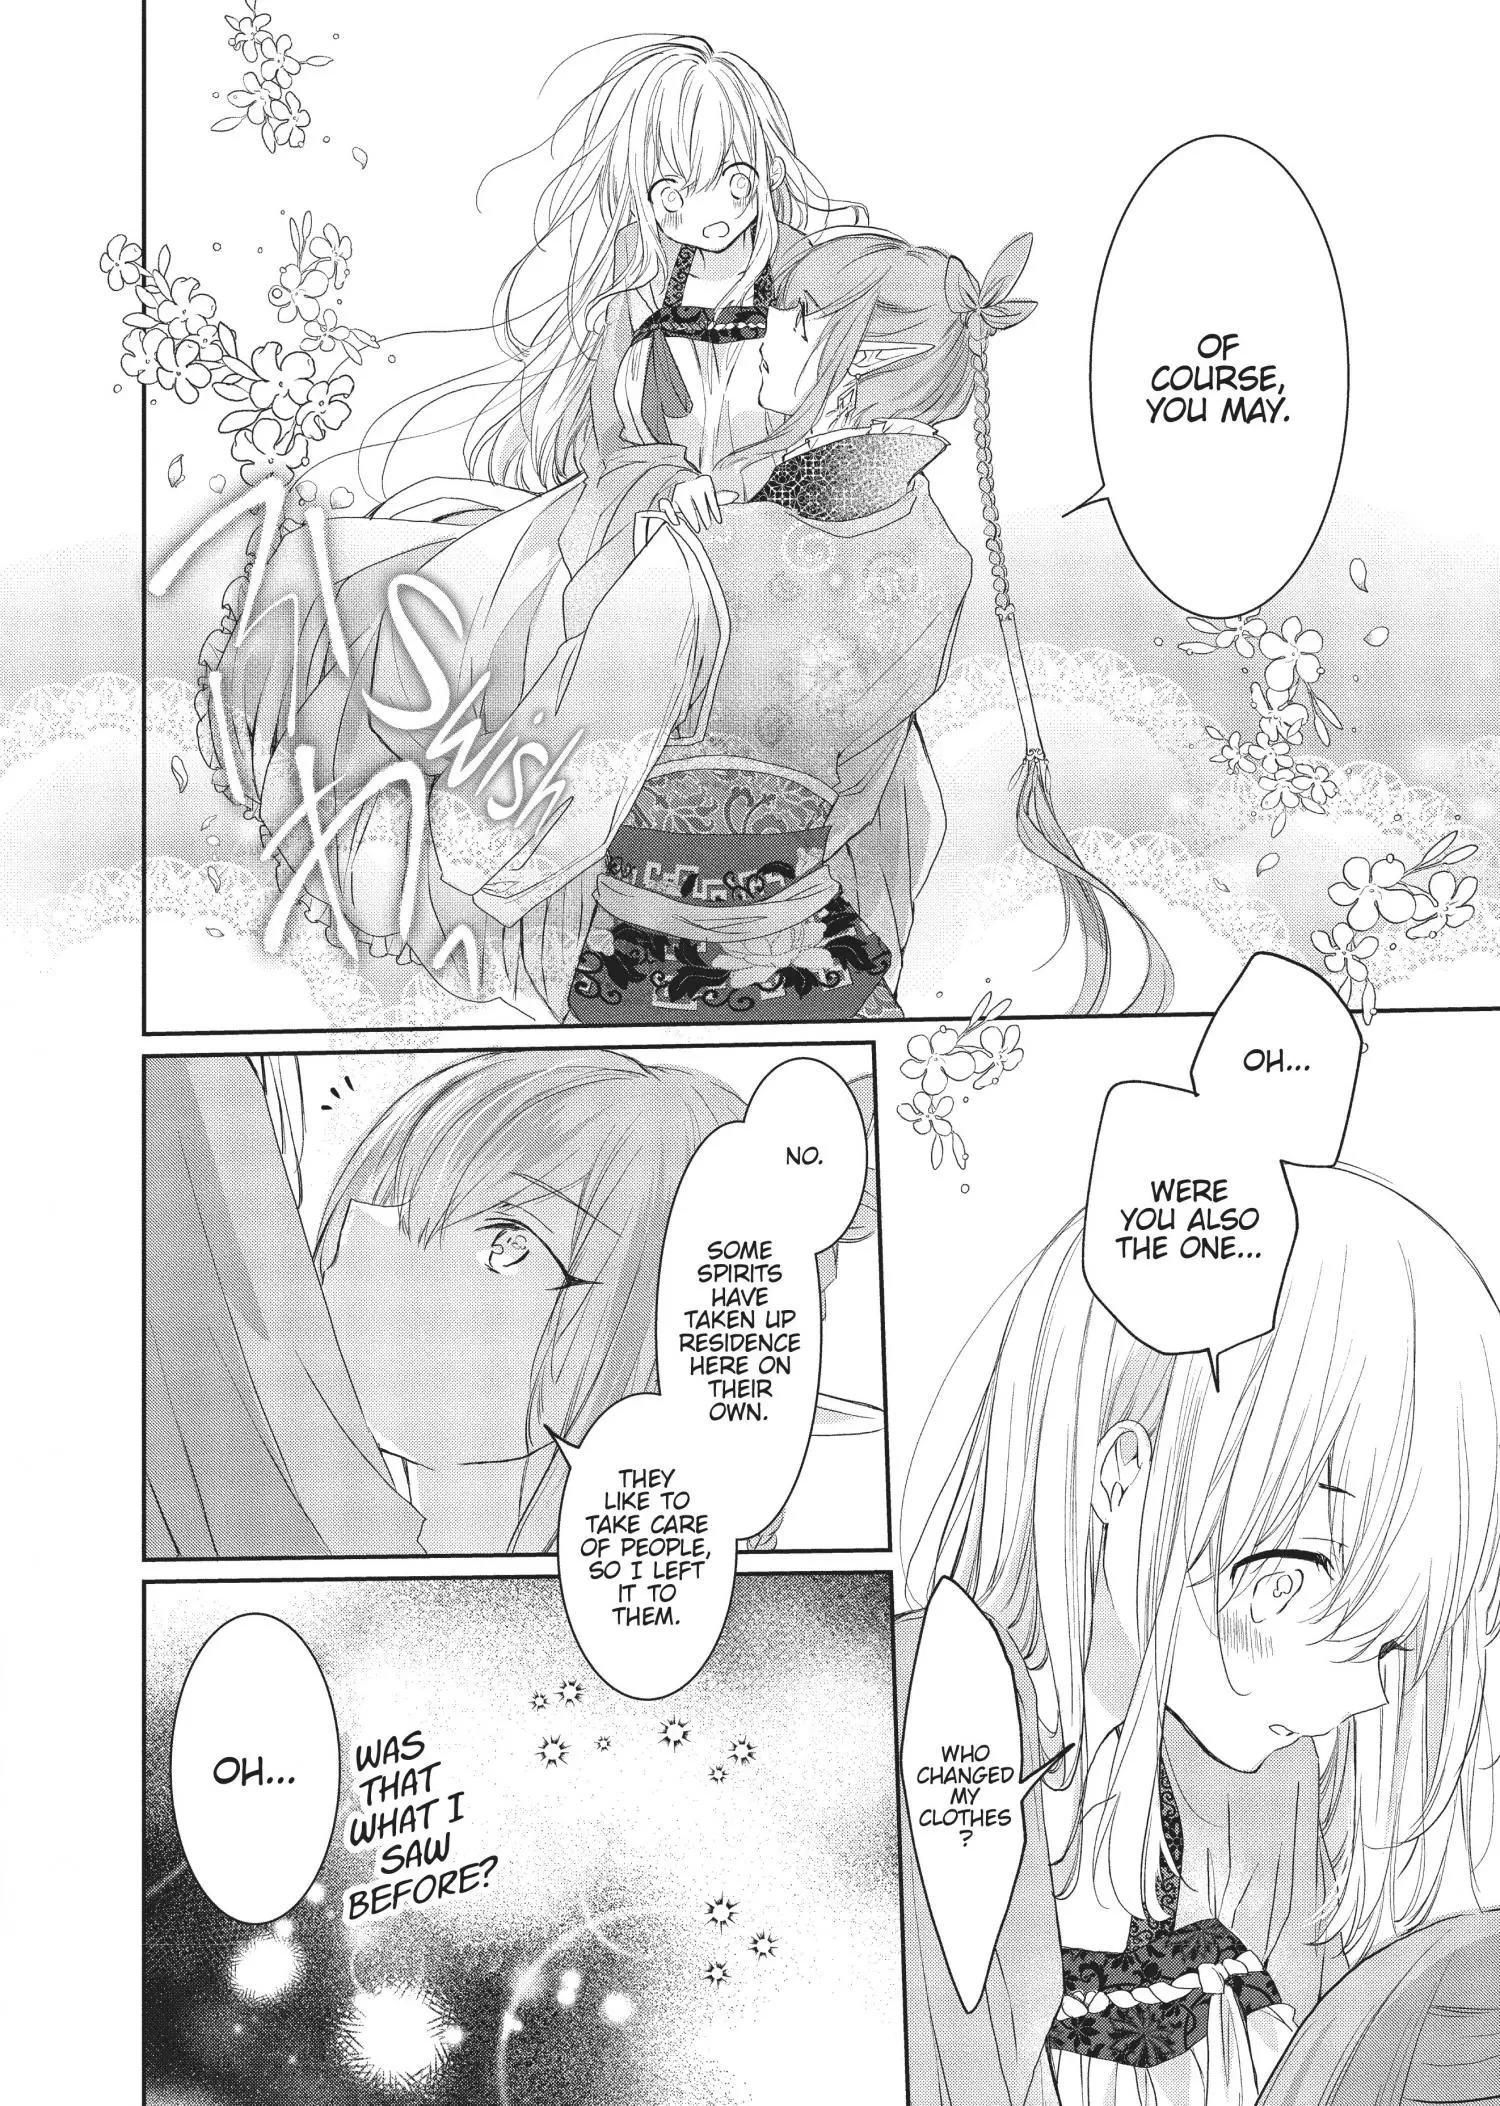 Outbride -Ikei Konin- - 16 page 13-39d0eb40